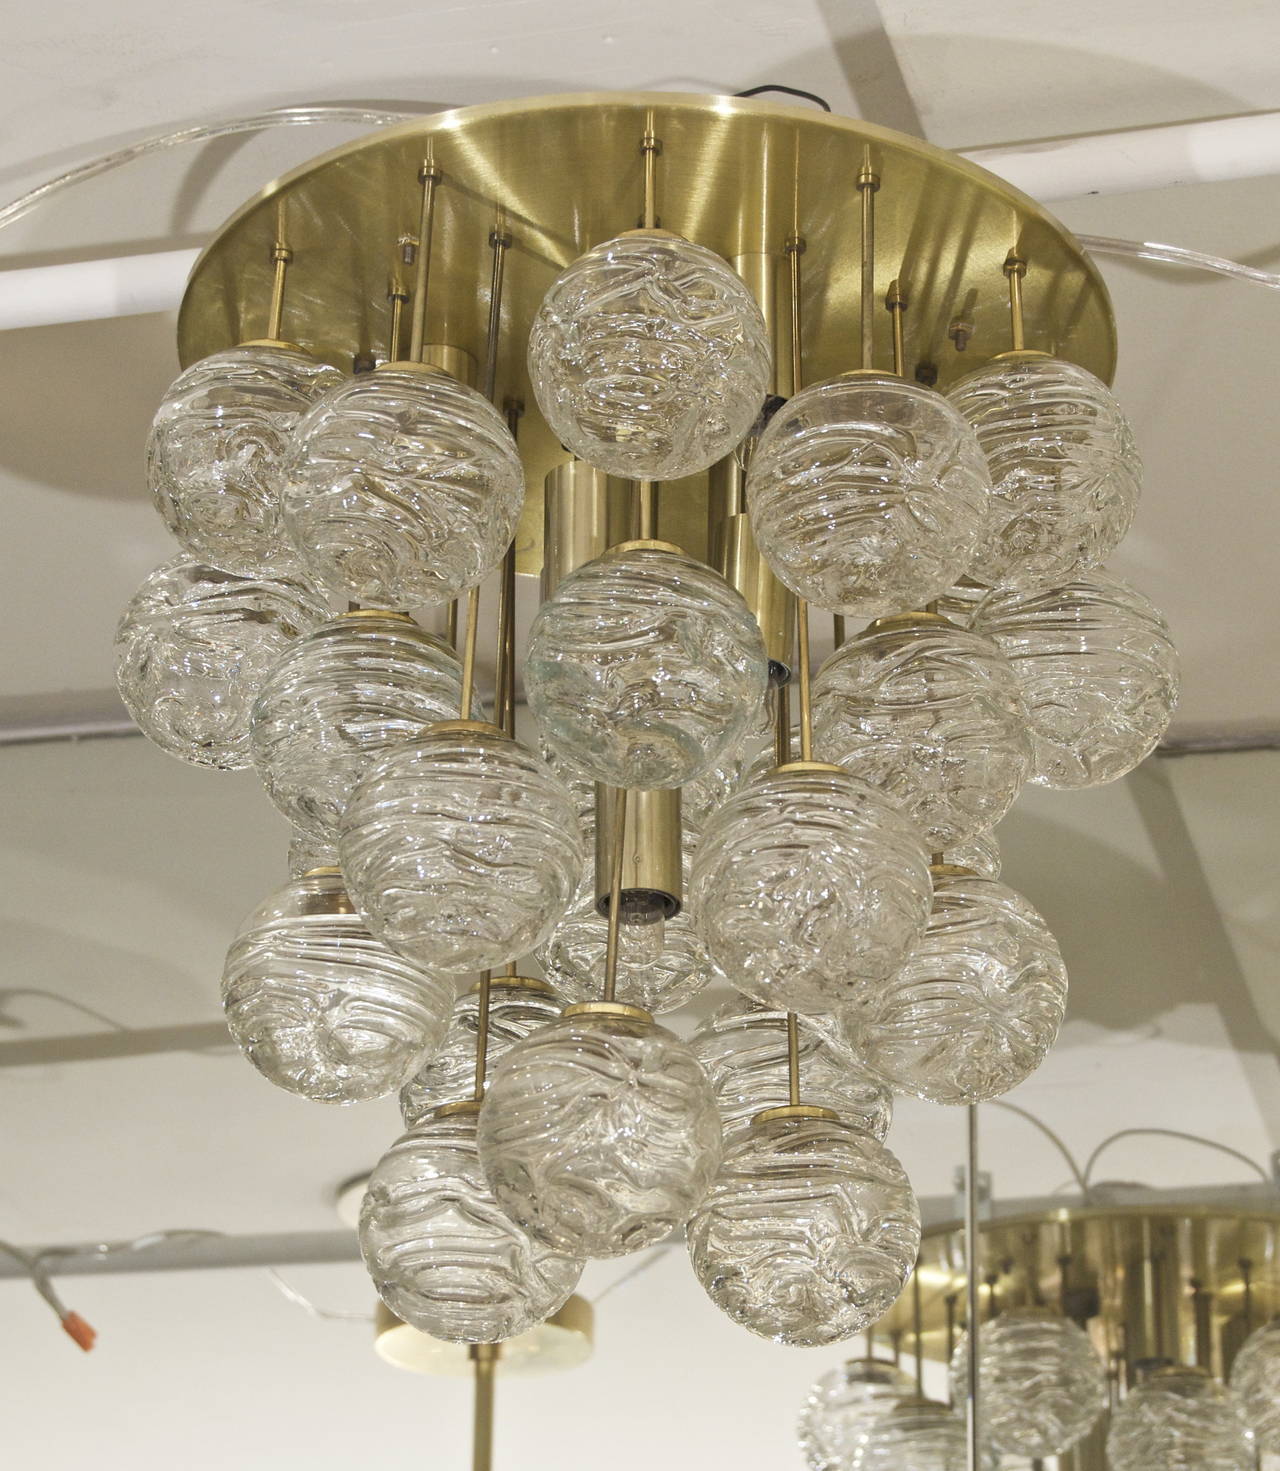 Excellent and rare Doria flush mount chandelier; the central brass light base is surrounded by organic spun glass globes supported by a central brass disc.

Takes seven E-14 base bulbs up to 40 watts per bulb, new wiring.